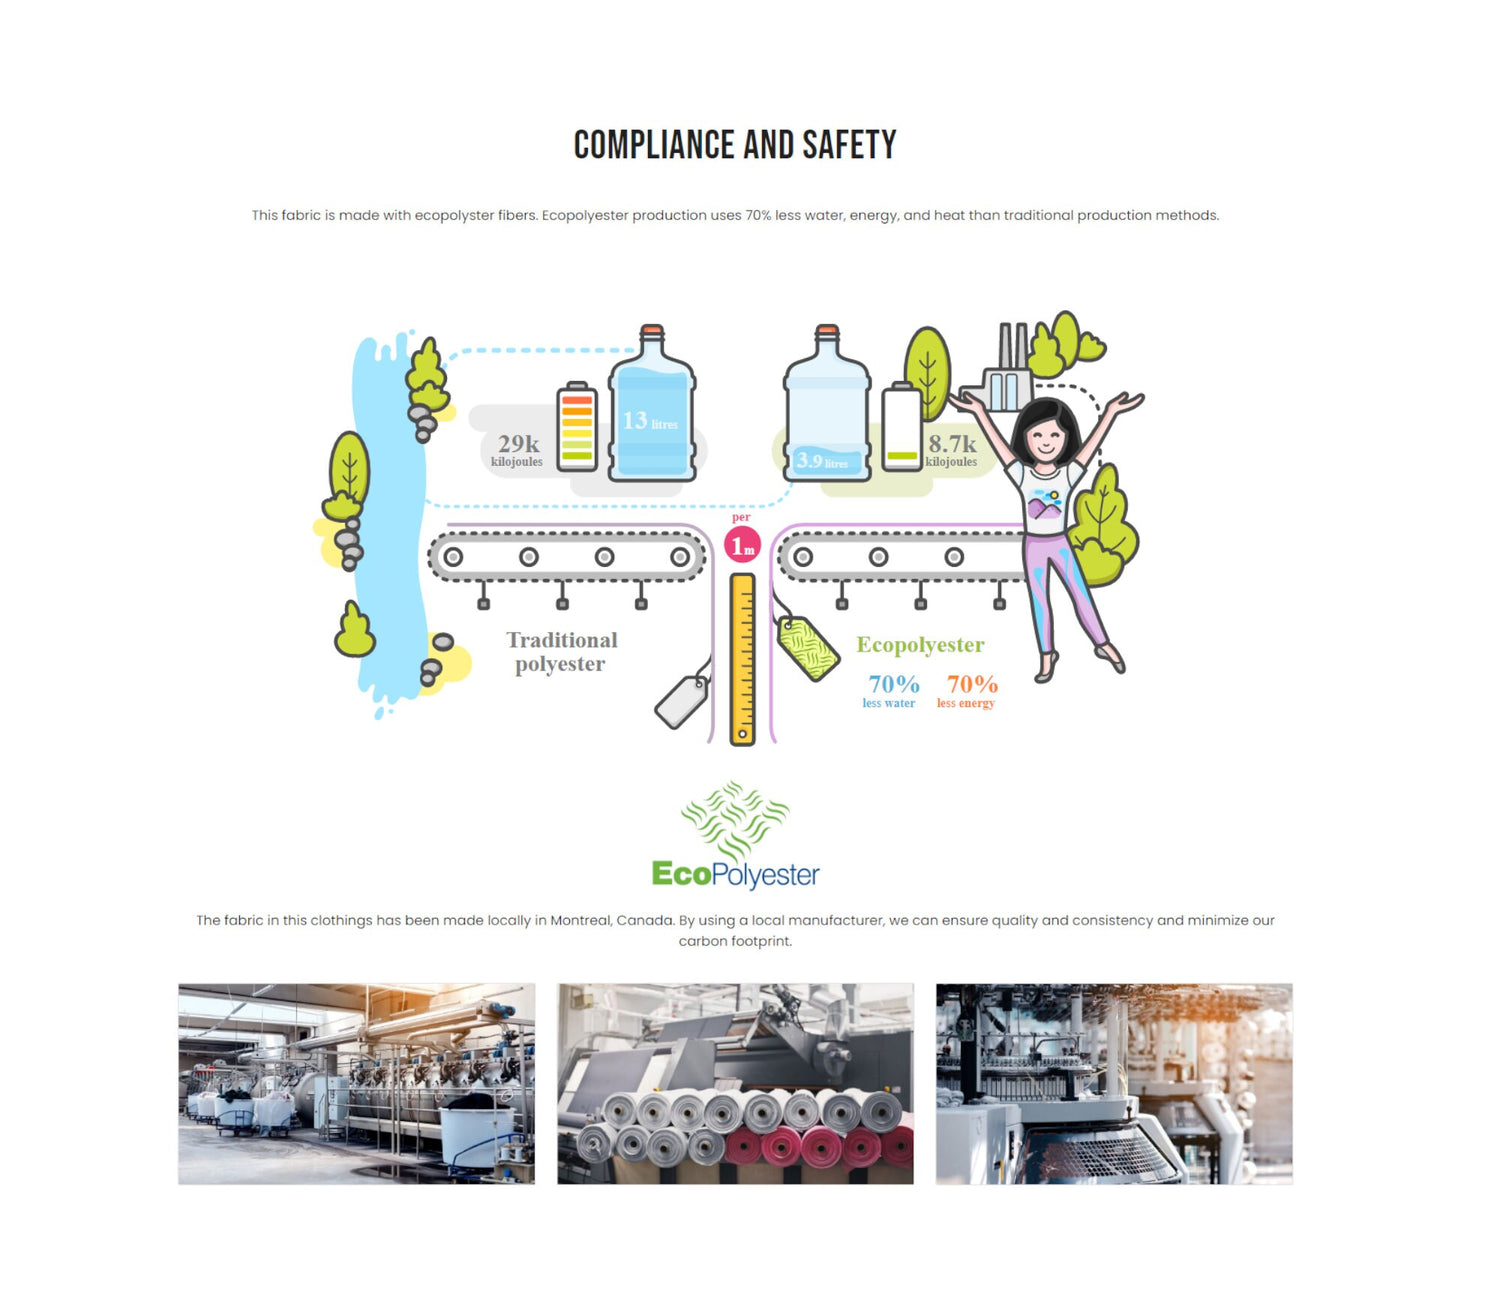 Infographic explaining that traditional polyester uses 29 kilojoules of energy and 13L of water per metre to make.Ecopolyesteruses 70% less - 3.9L of water and 8.7 kilojoules of energy.